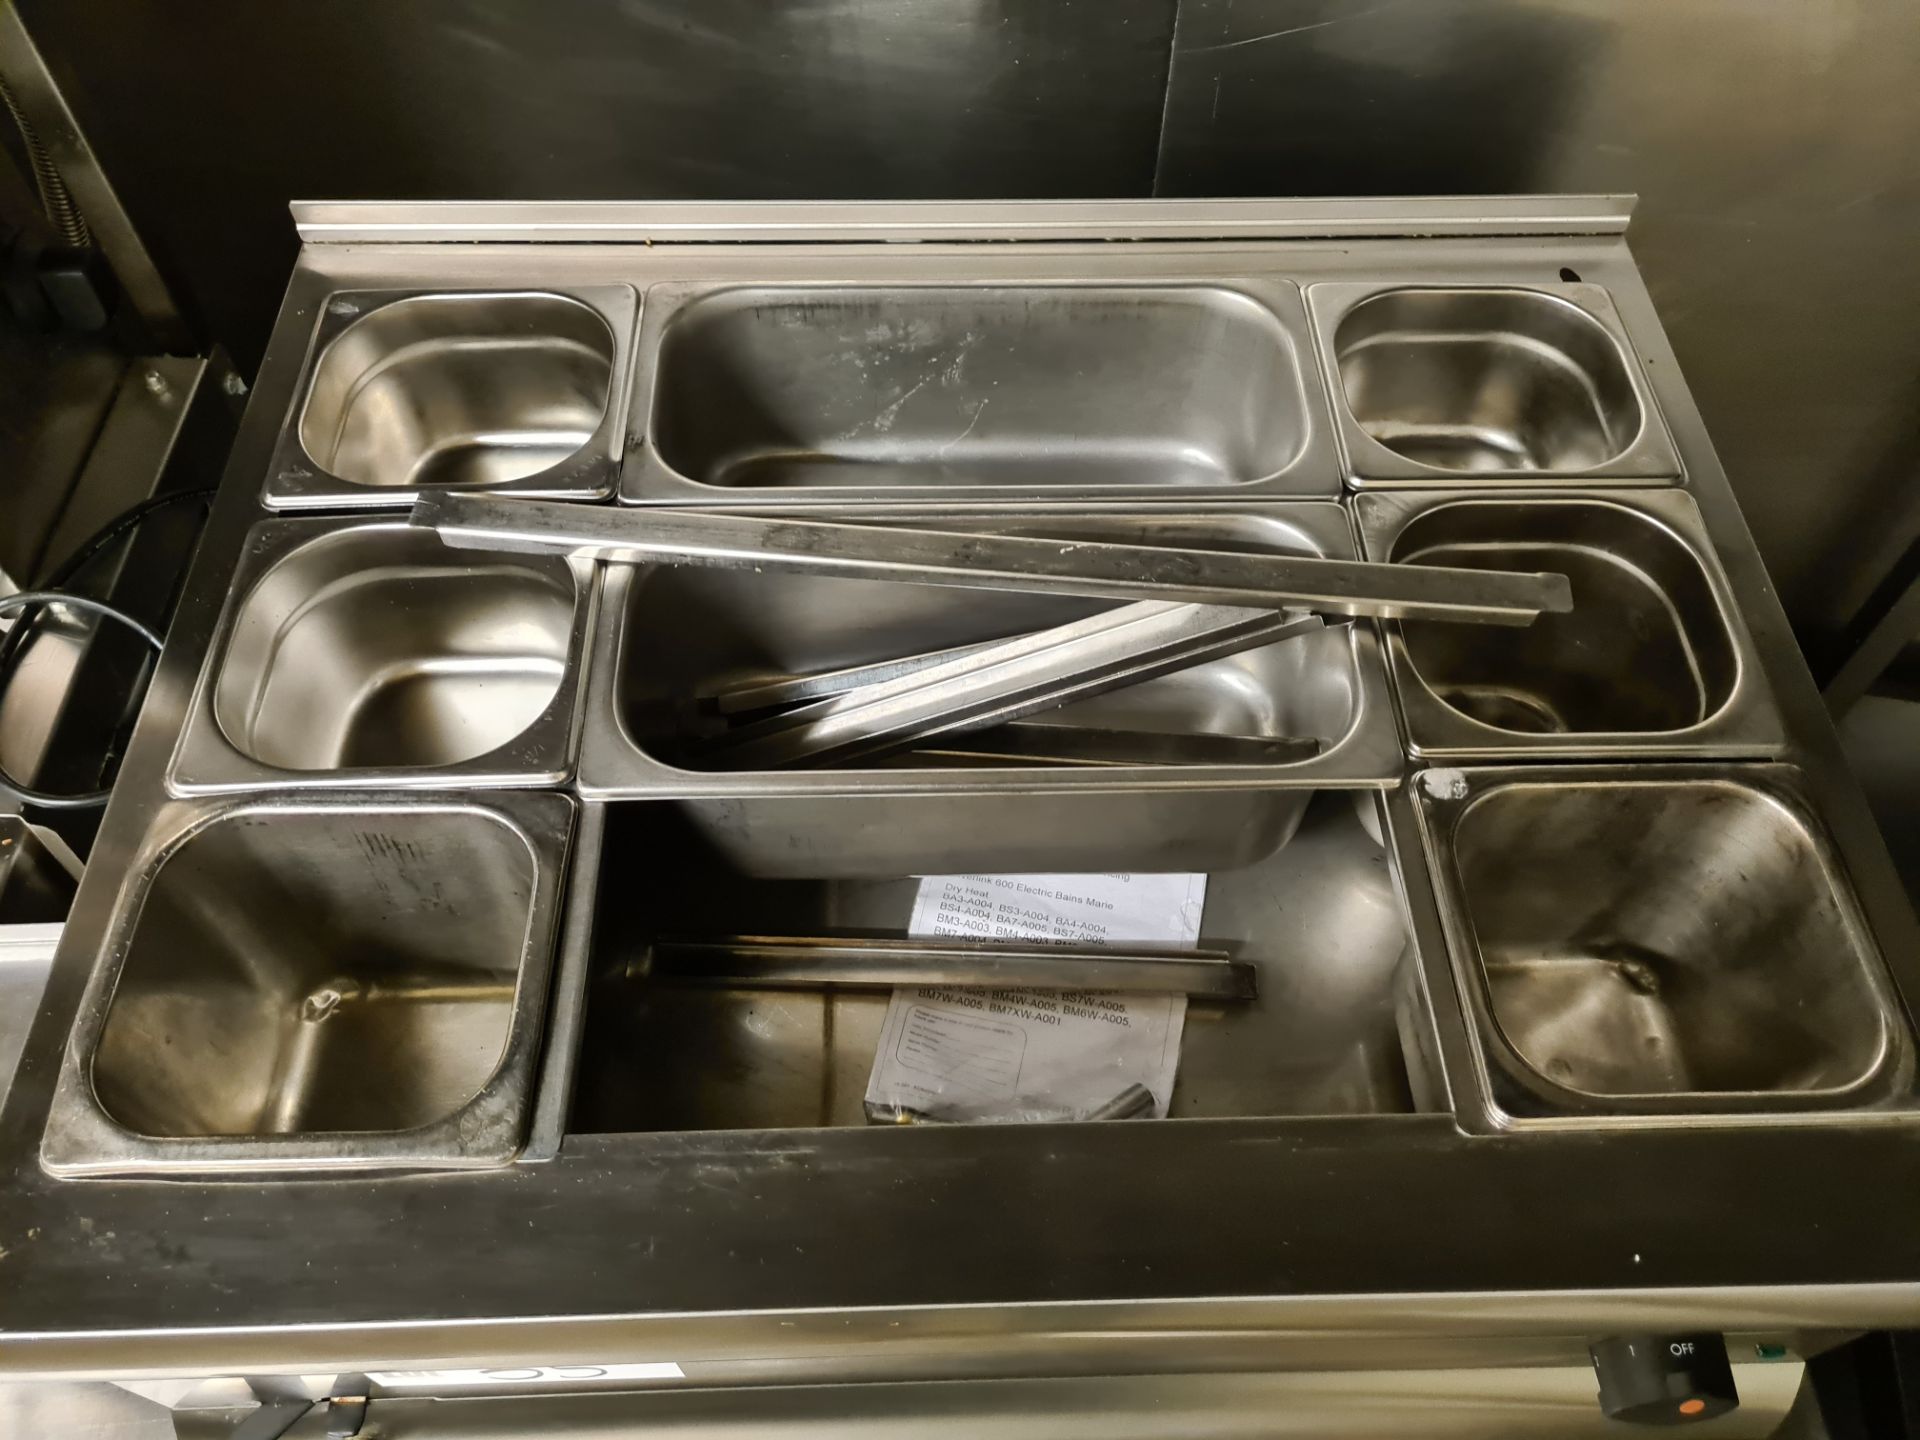 LINCAT A005 Table Top Stainless Steel Bain Marie, S/N 30376924 (240v) - Image 3 of 4